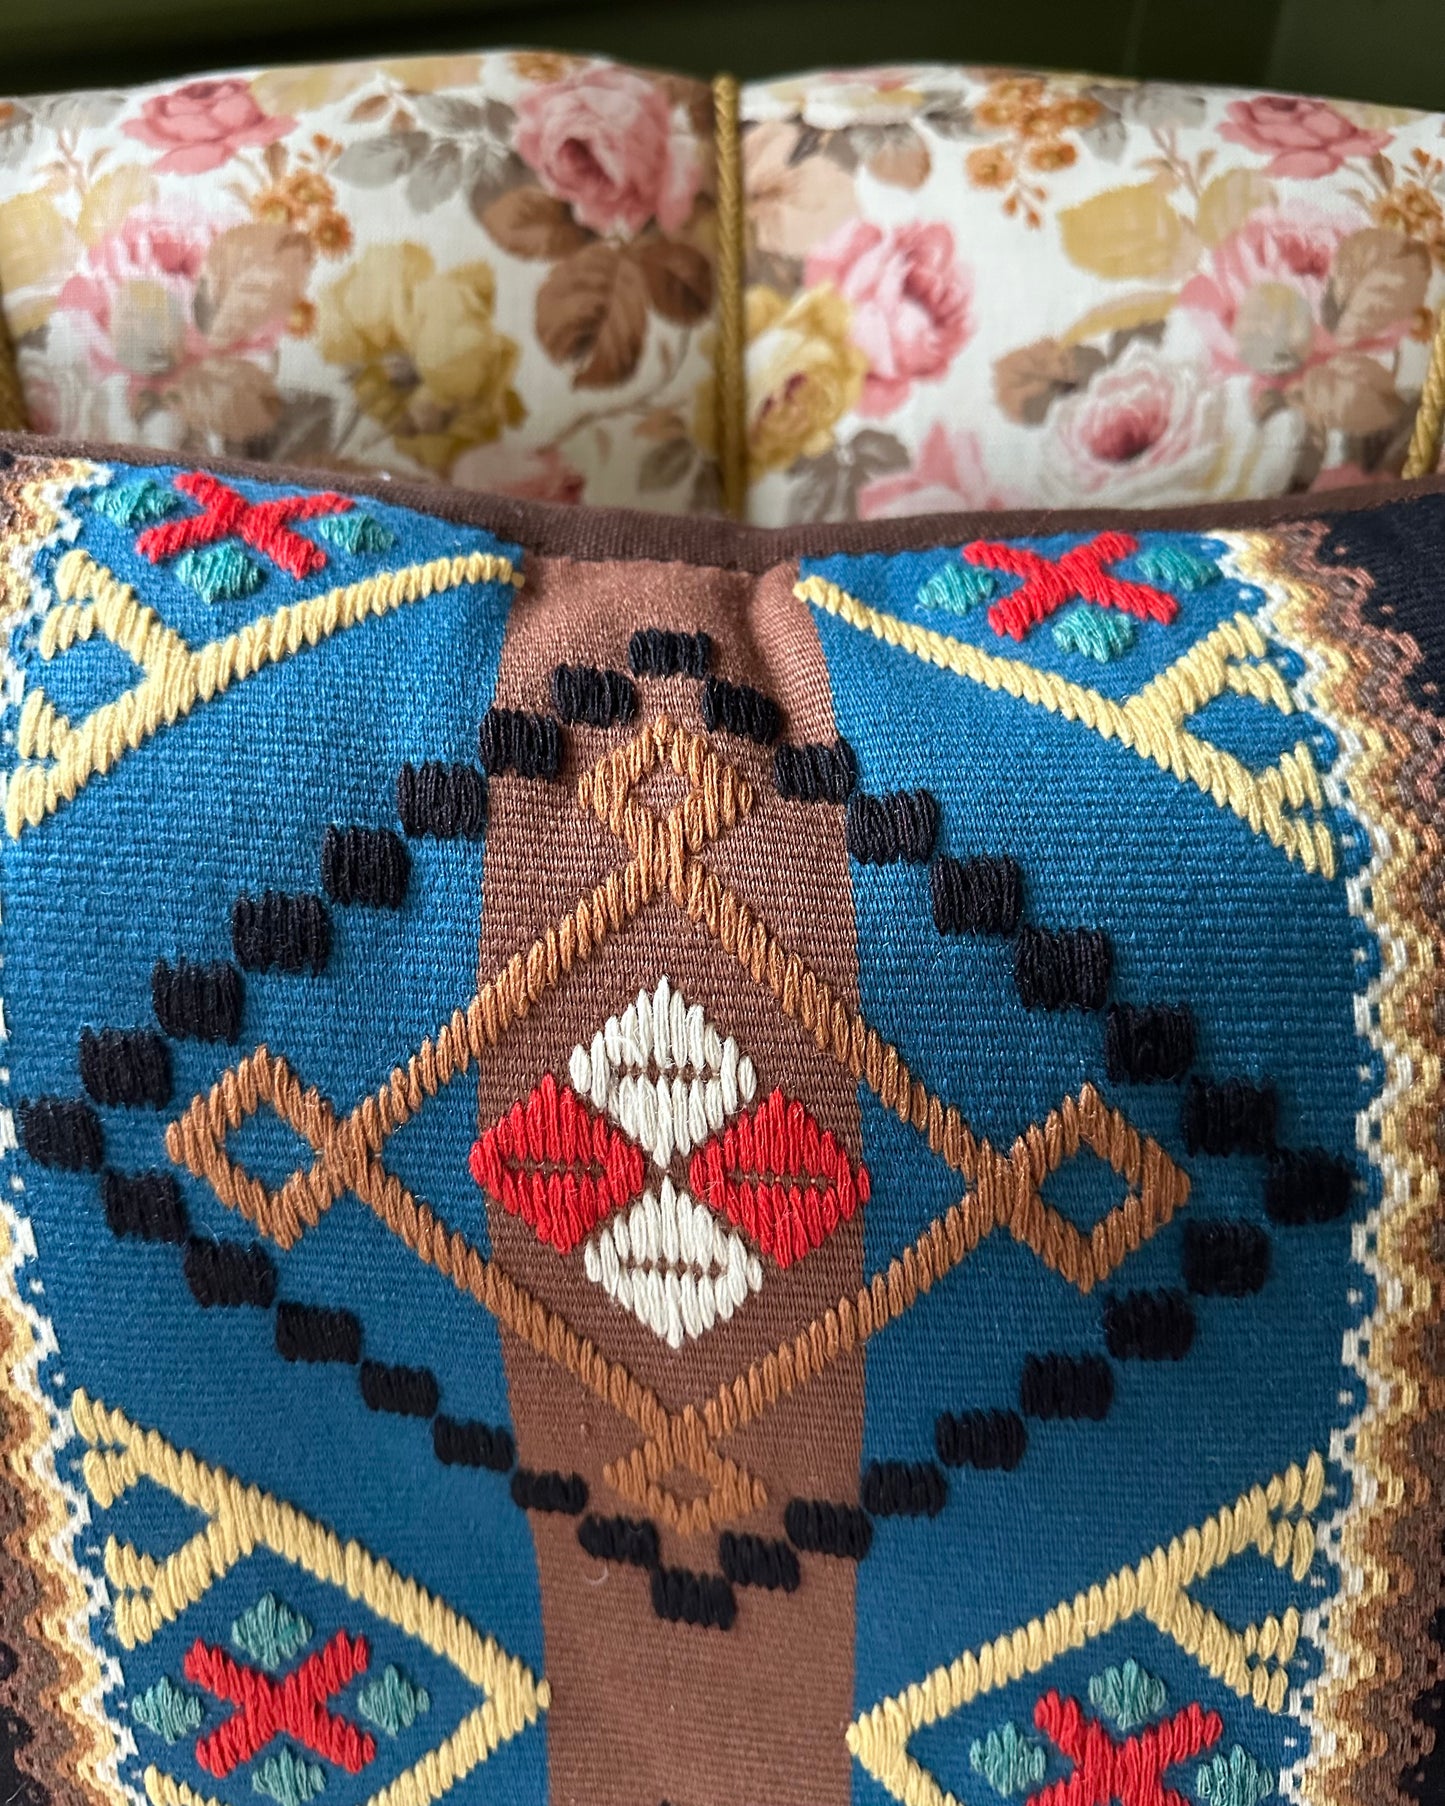 Hand-Embroidered Cushion